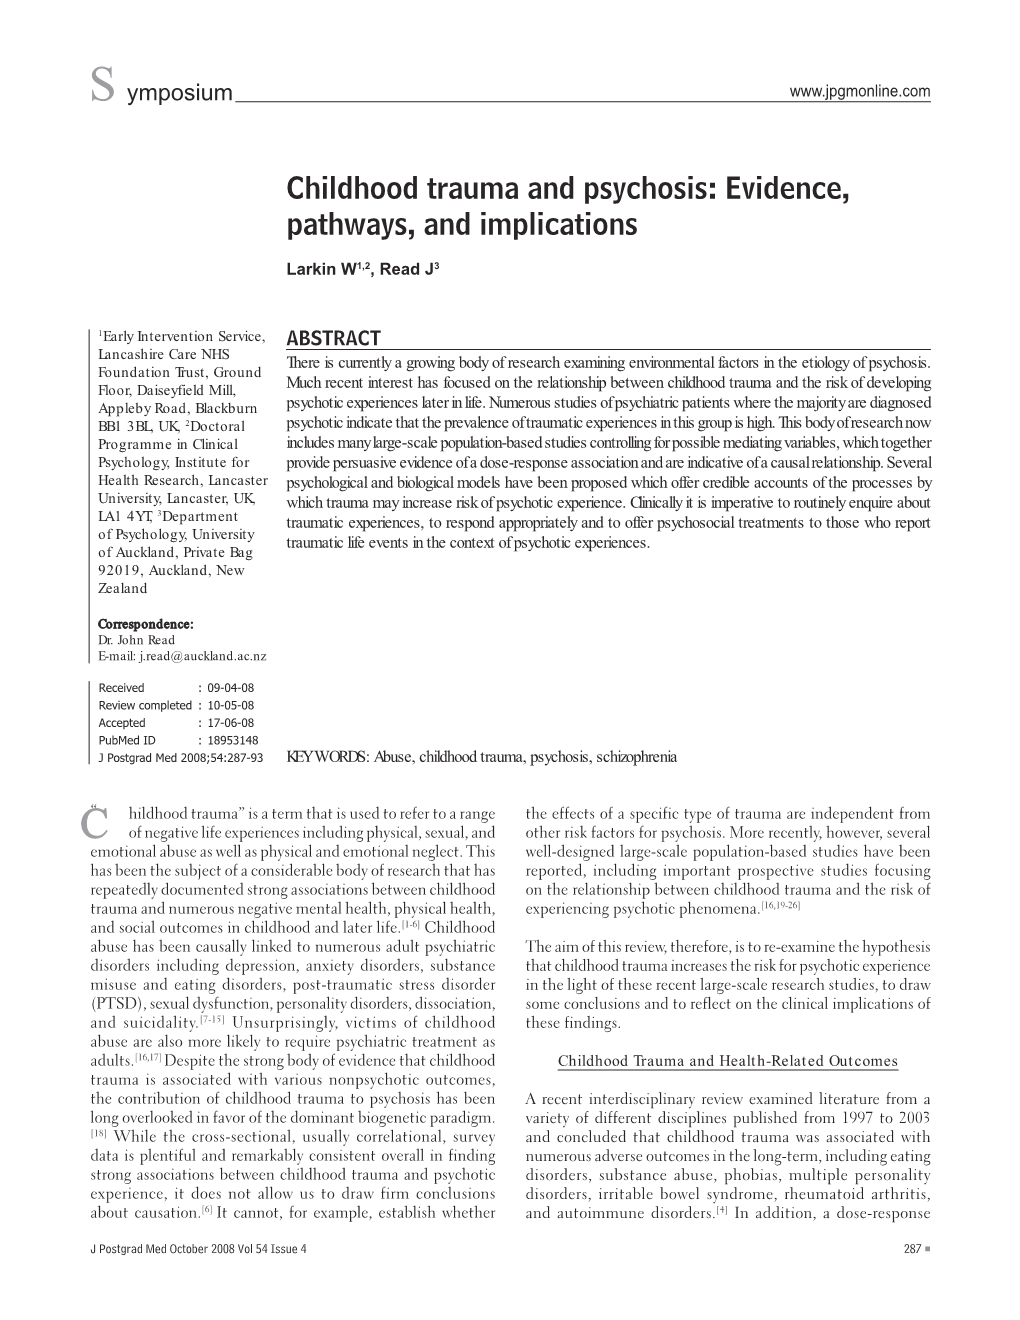 Childhood Trauma and Psychosis: Evidence, Pathways, and Implications